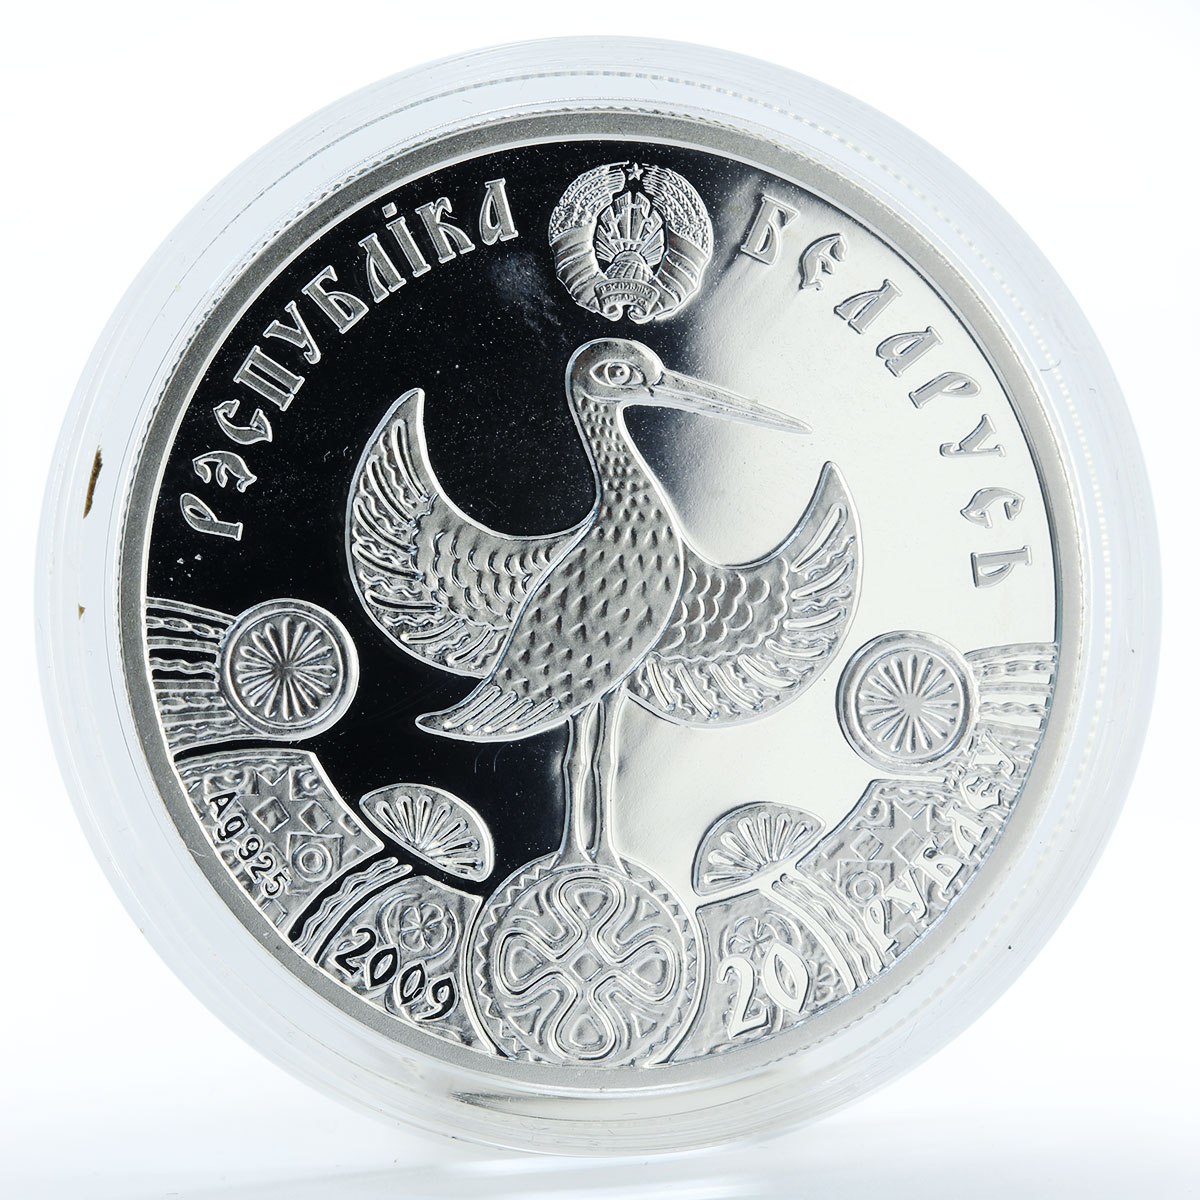 Belarus 20 rubles Family Traditions of Christening silver coin 2009